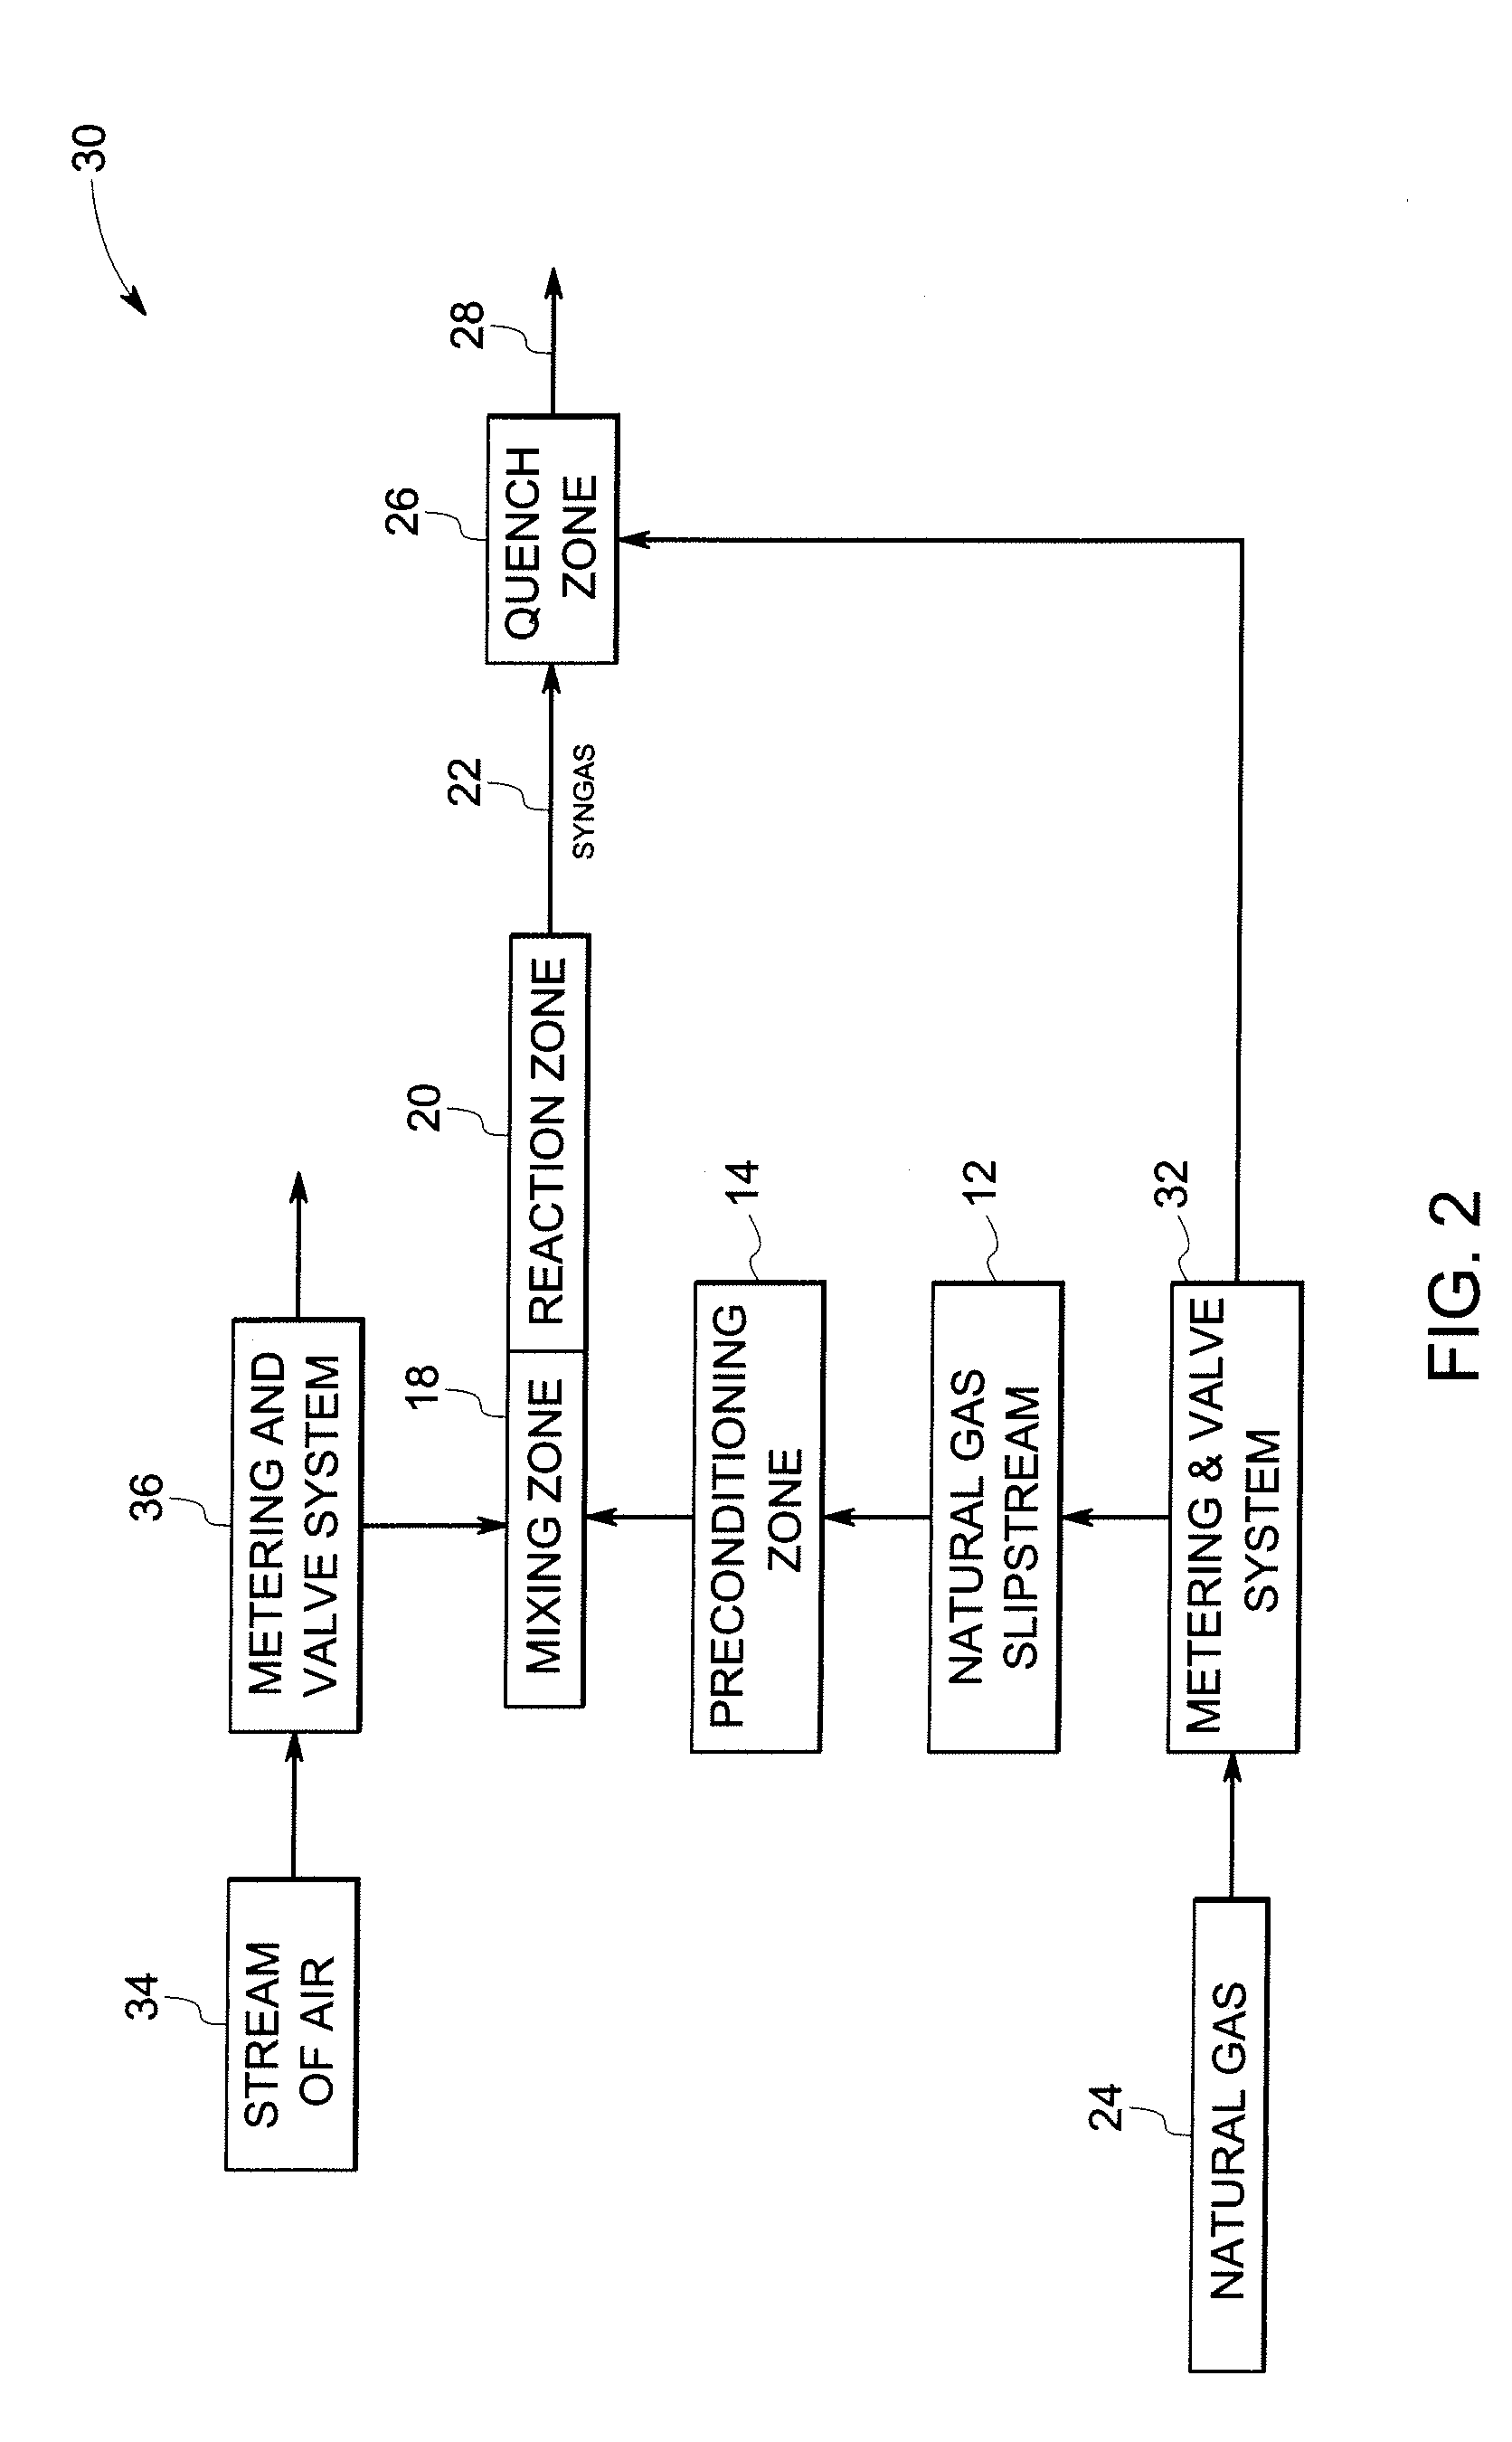 Fuel reformer system and a method for operating the same